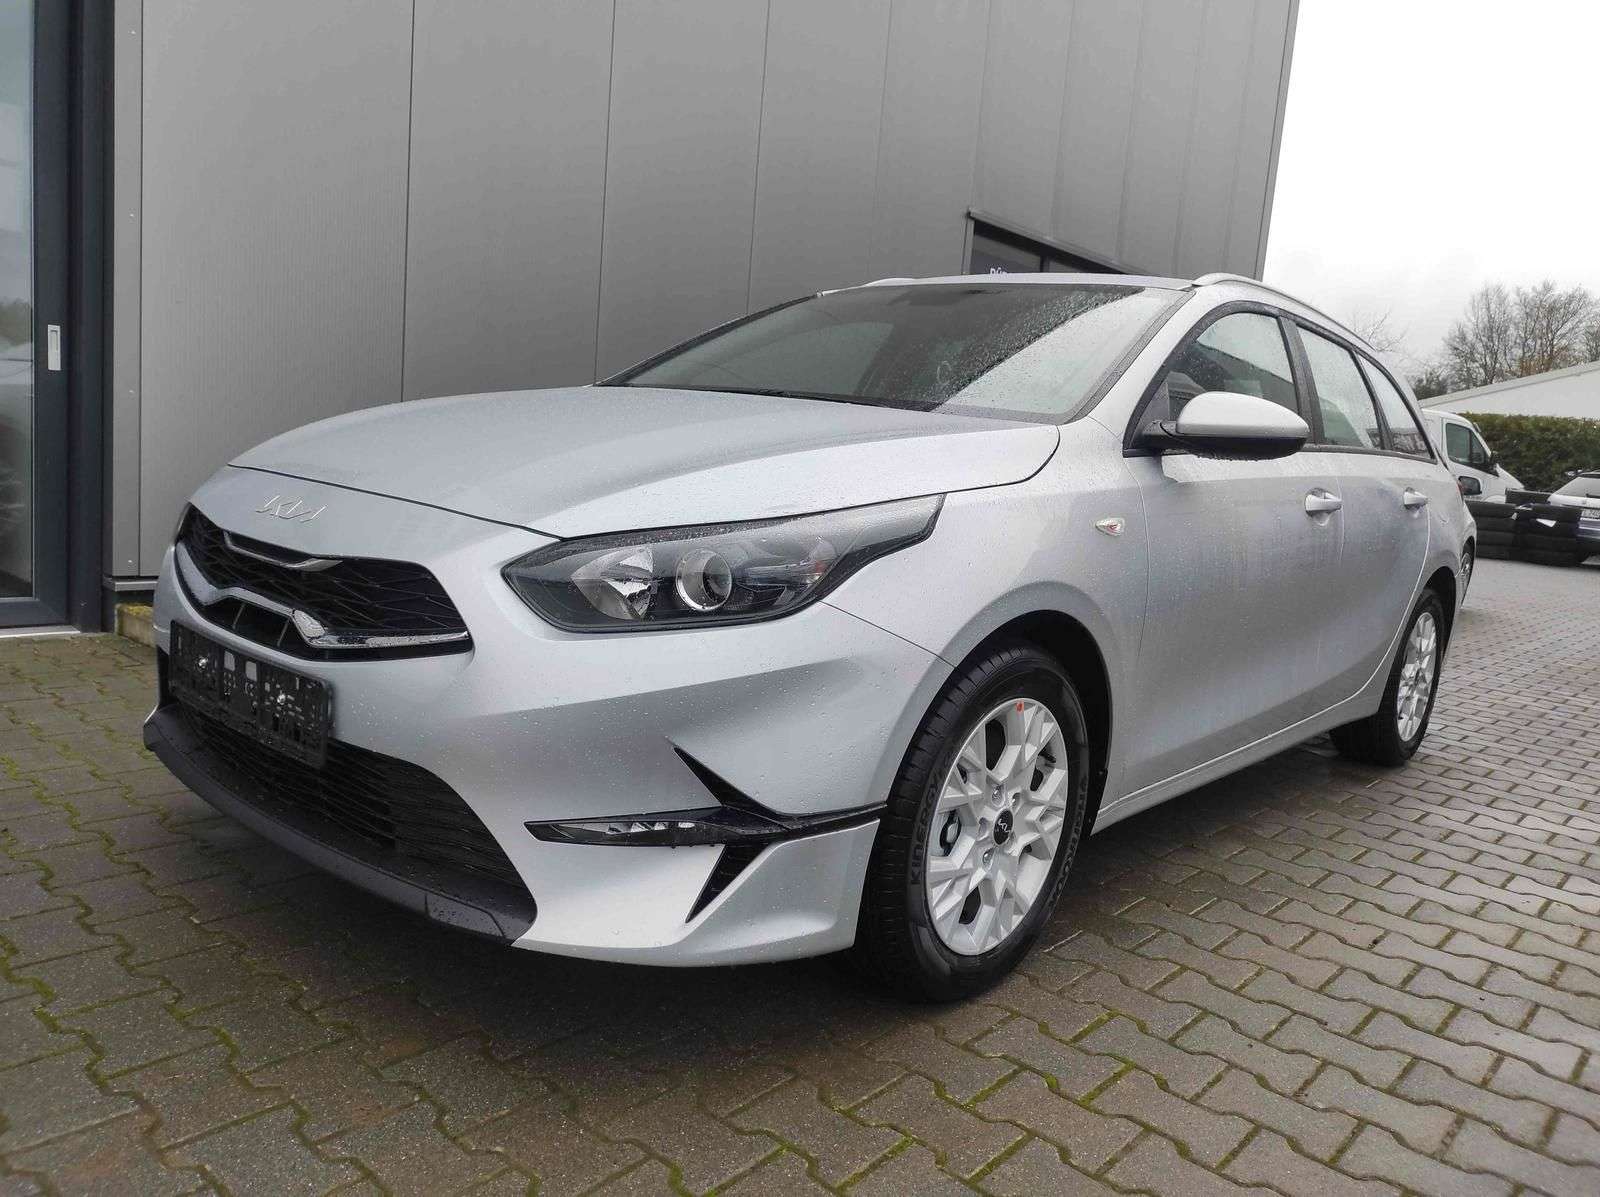 Kia Ceed SW / cee'd SW Station wagon in Silver used in Polch for € 21,990.-